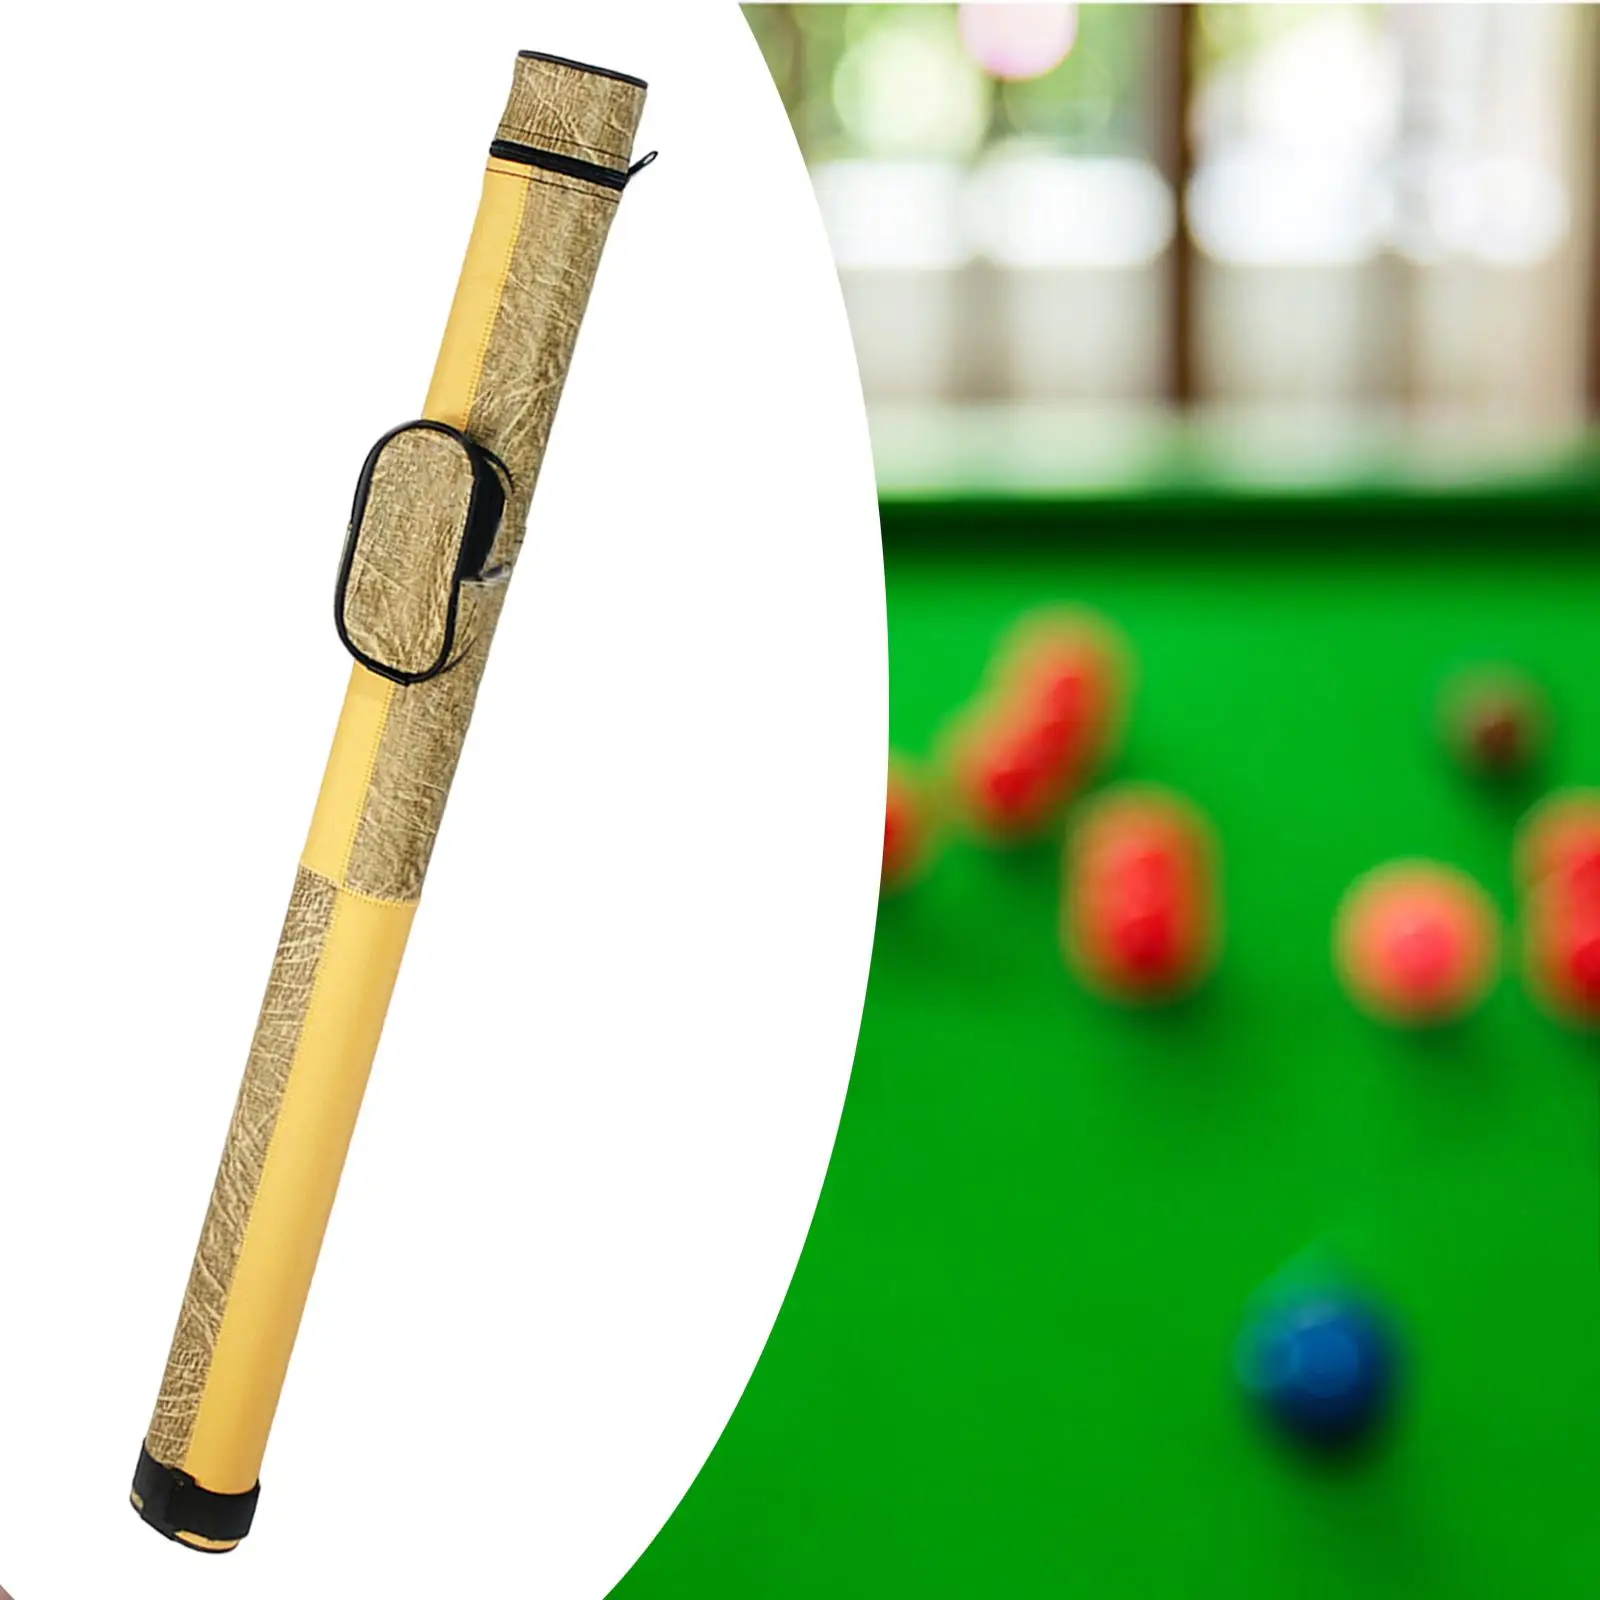 Billiards Pool Cue Carrying Case Billiard Pool Cue Bag Lightweight Billiard Pool Cue Stick Carrying Bag for Snooker Accessory